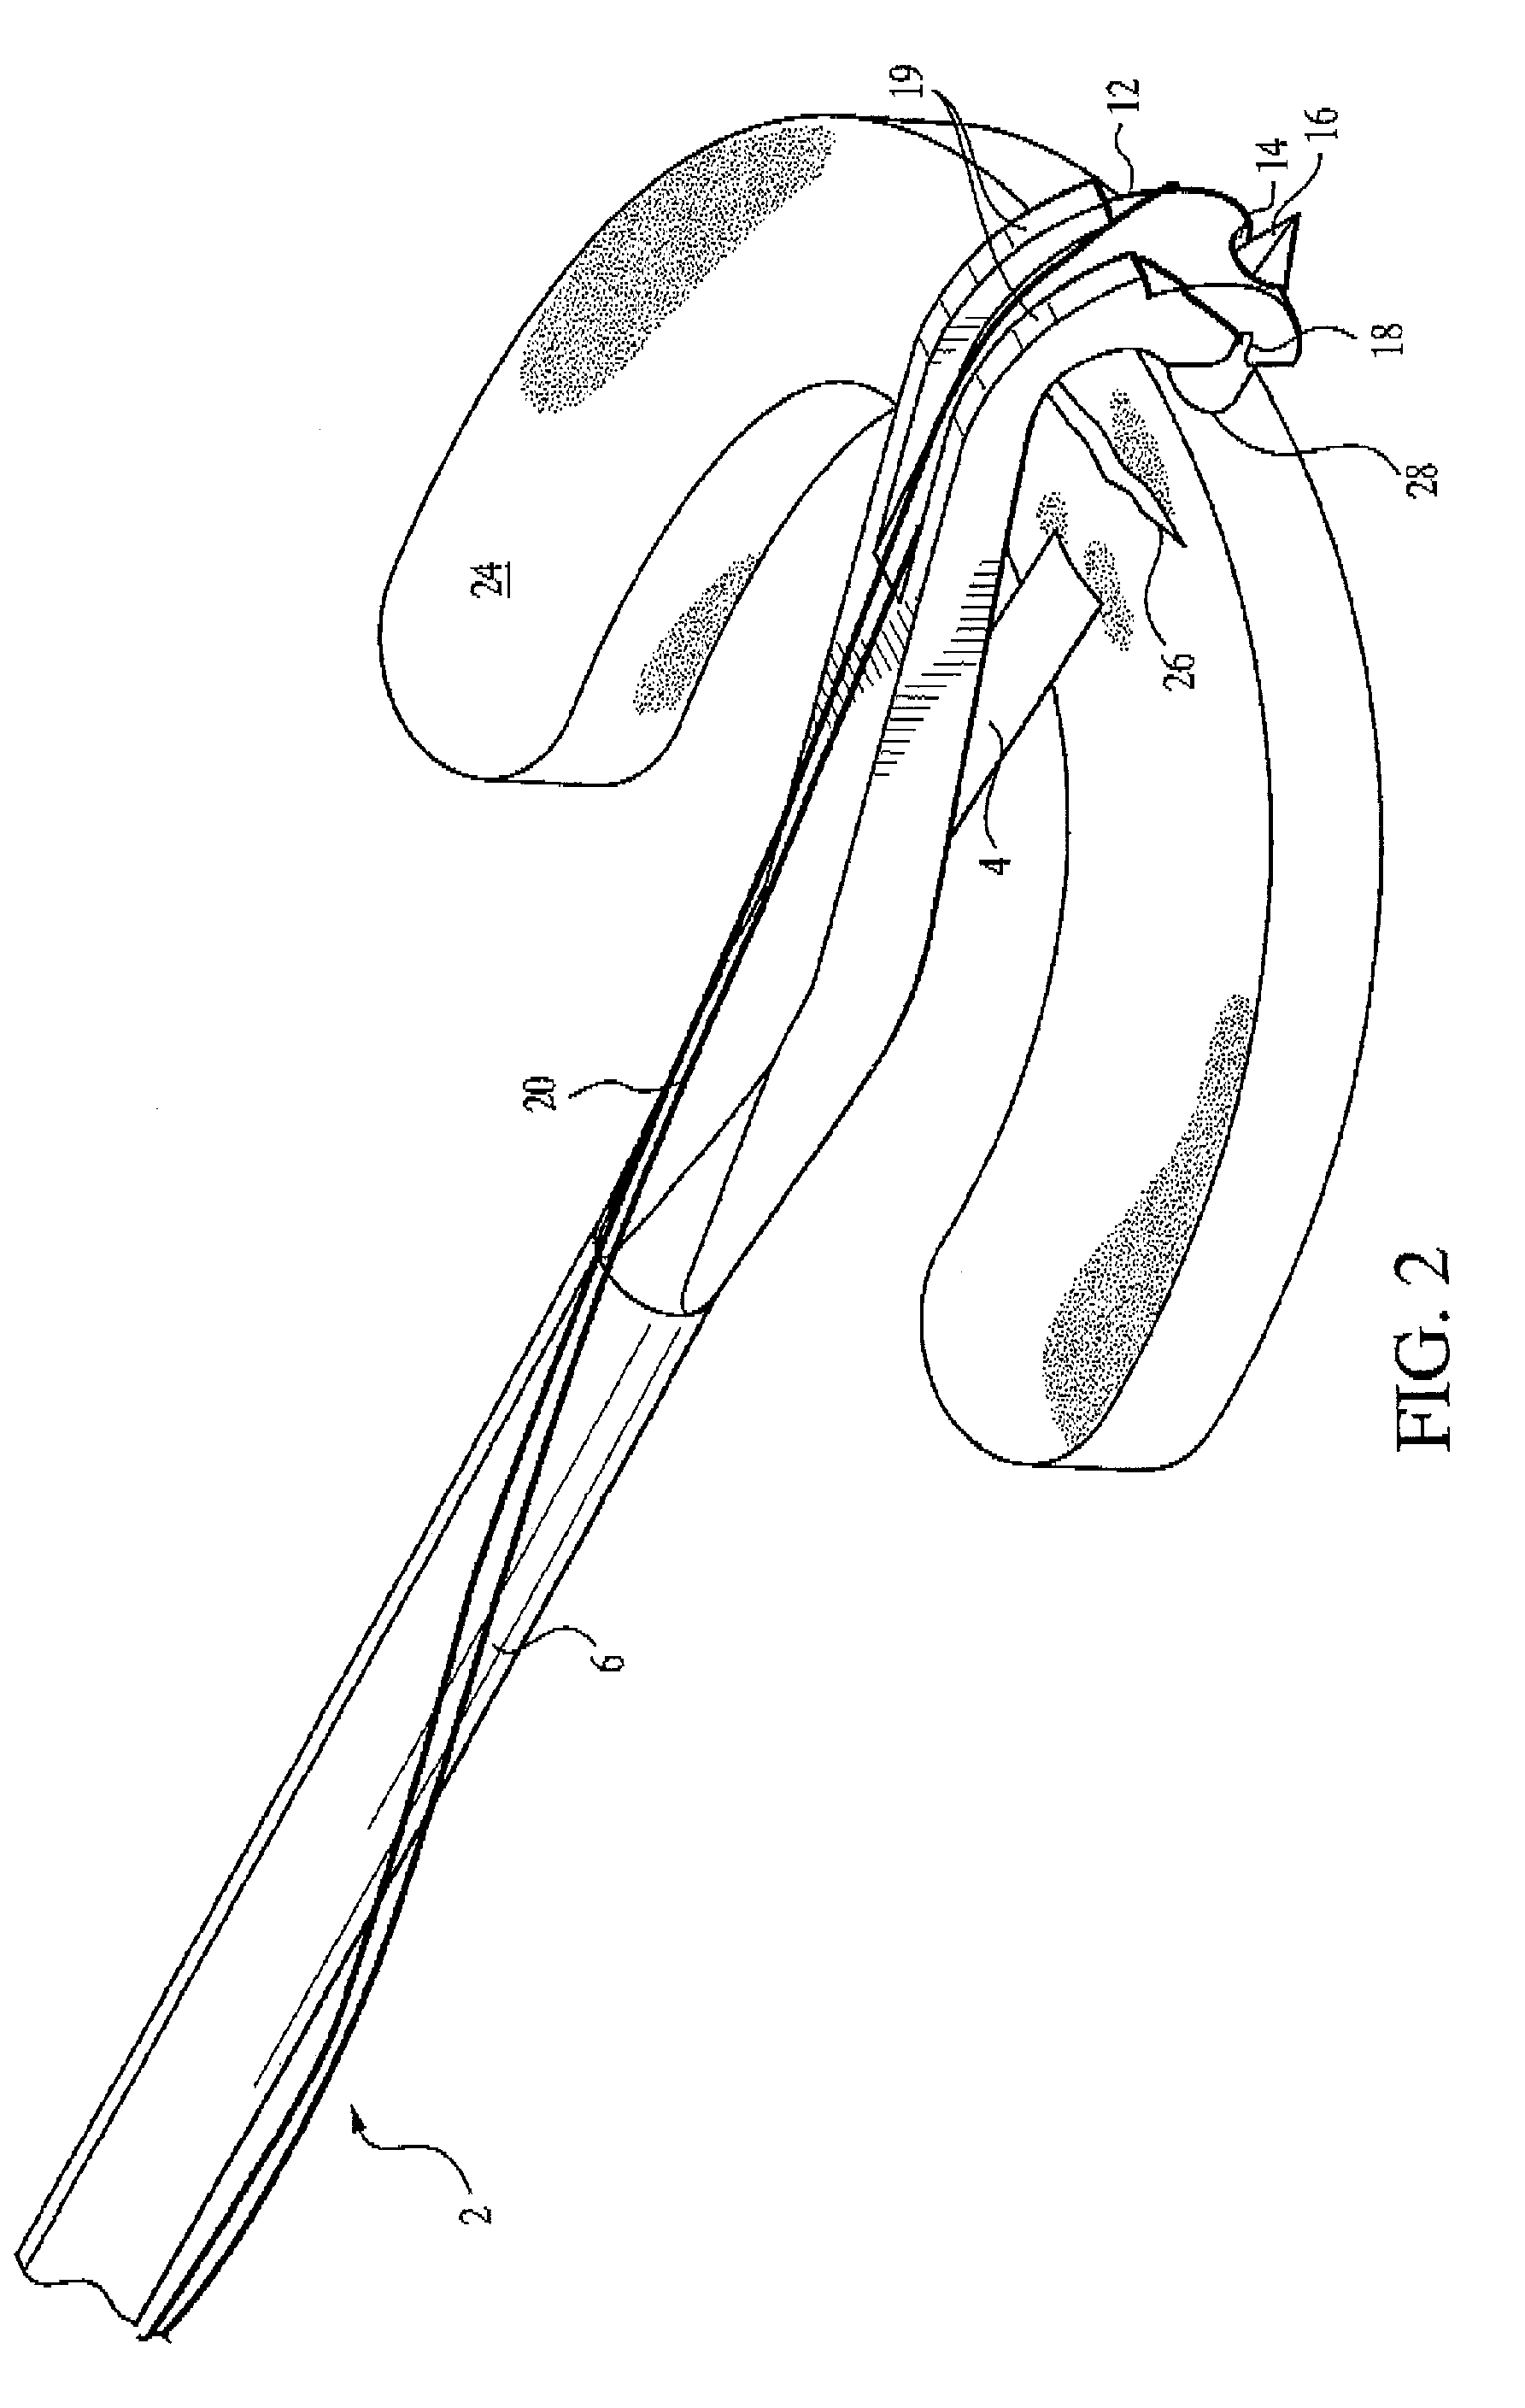 Meniscal suturing instrument and method